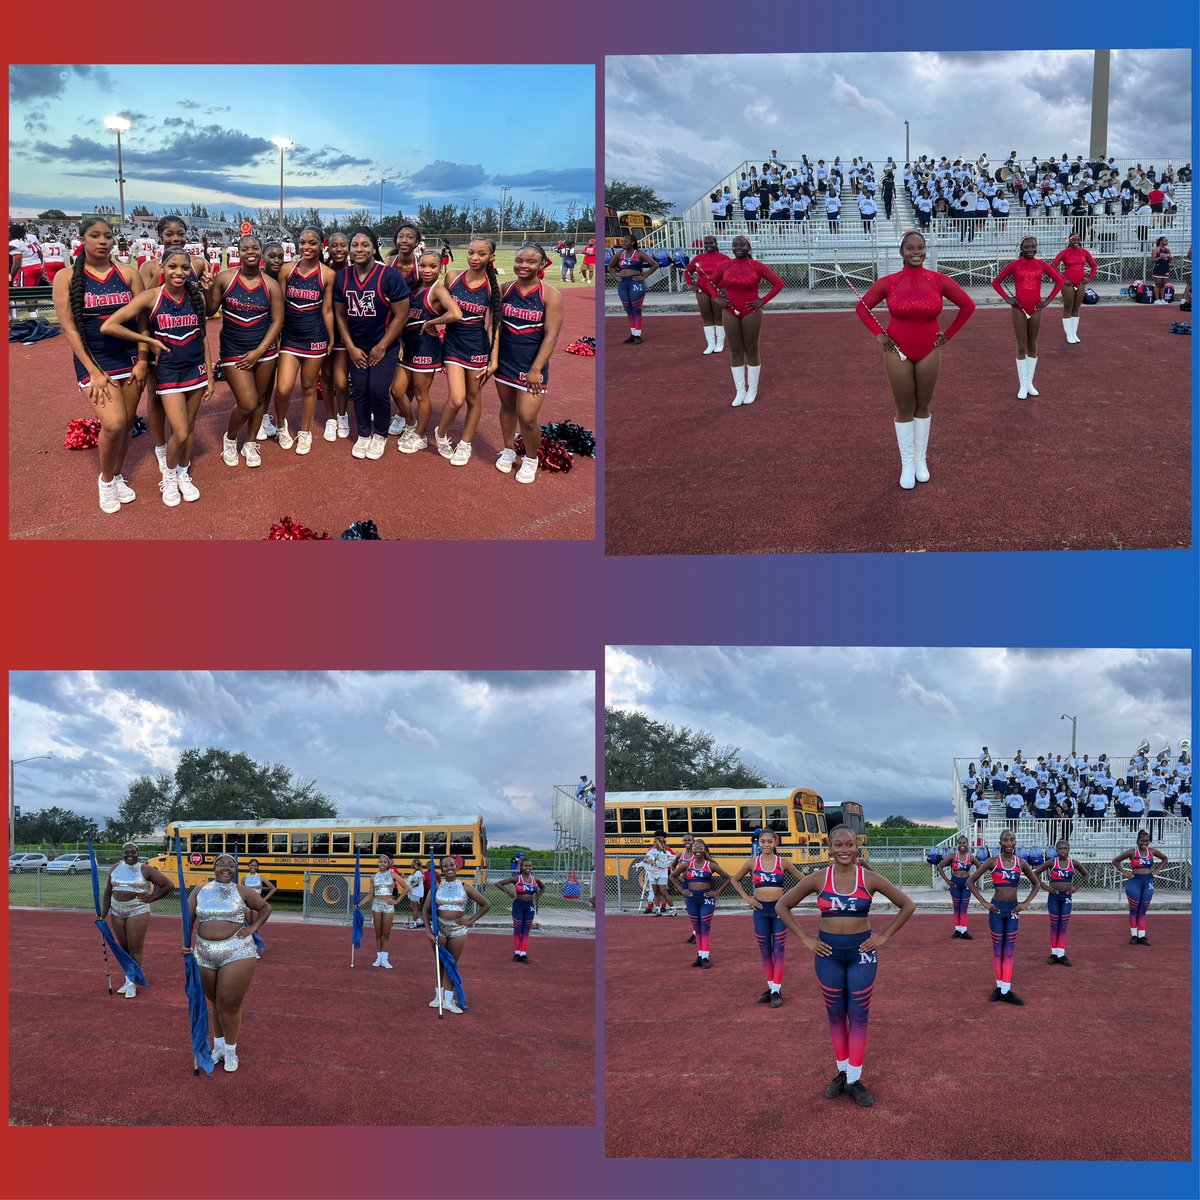 🔴⚪️🔵Our PATRIOT pride shines even brighter after a football win! 🎉 #WeCan’tHideOurPatriotPride #FootballVictory 🏆